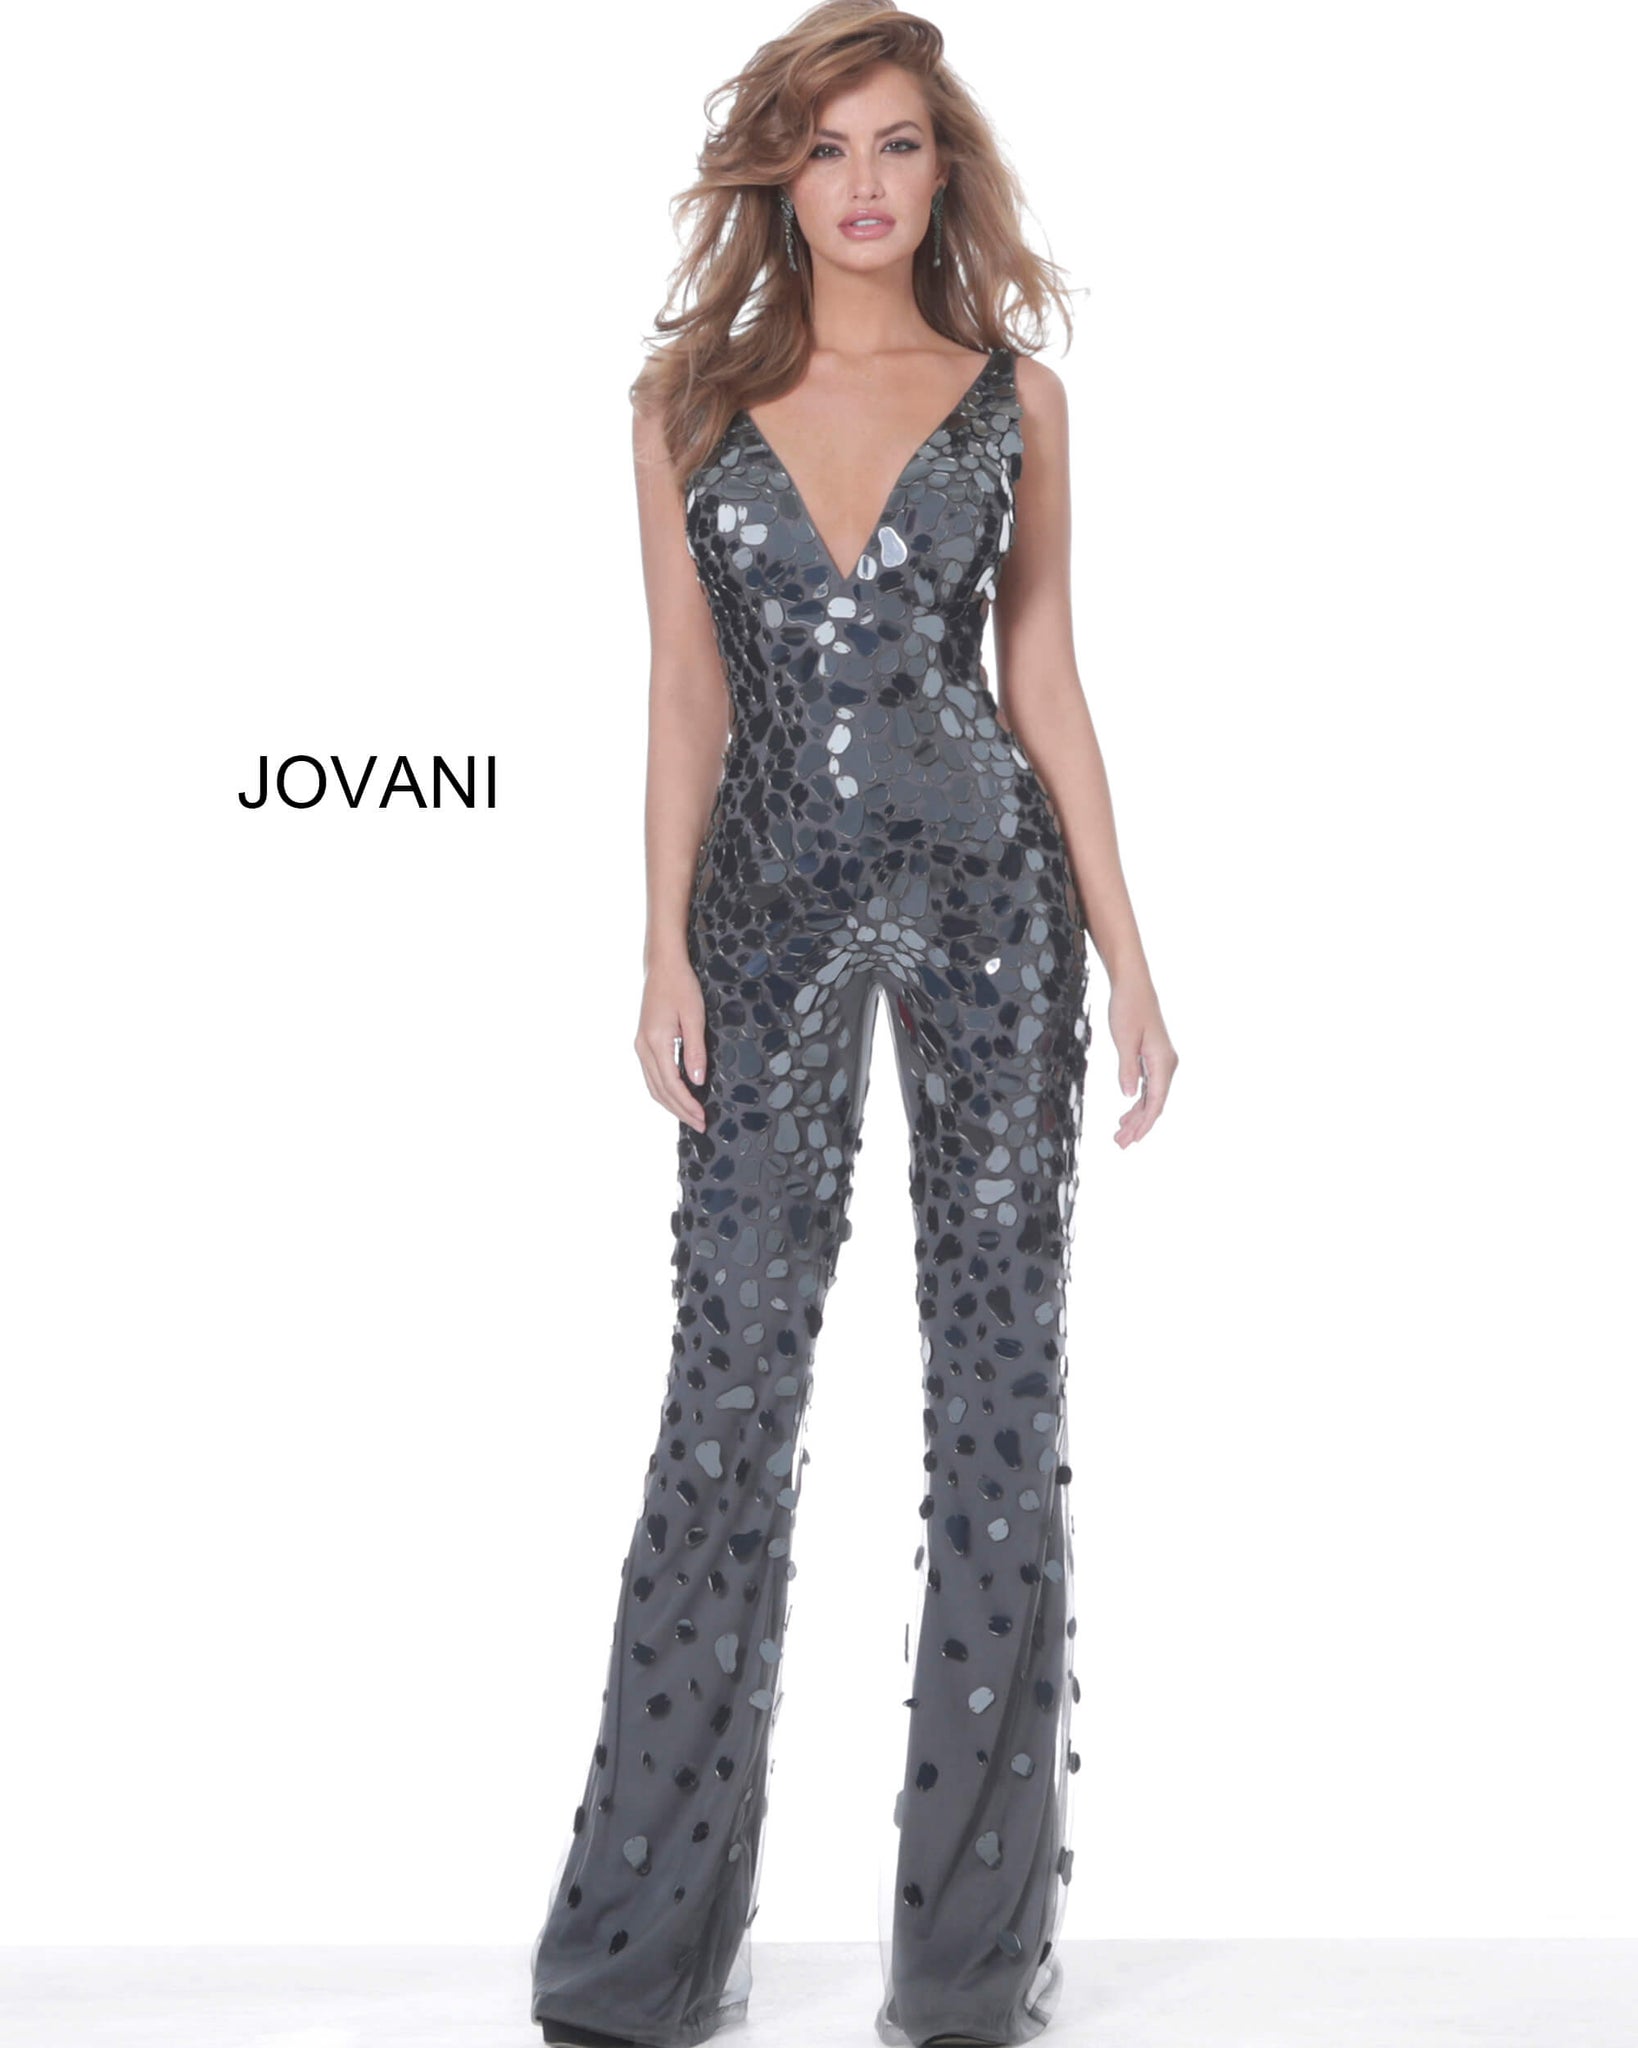 French Novelty: Jovani 68612 Red Sequin Jumpsuit